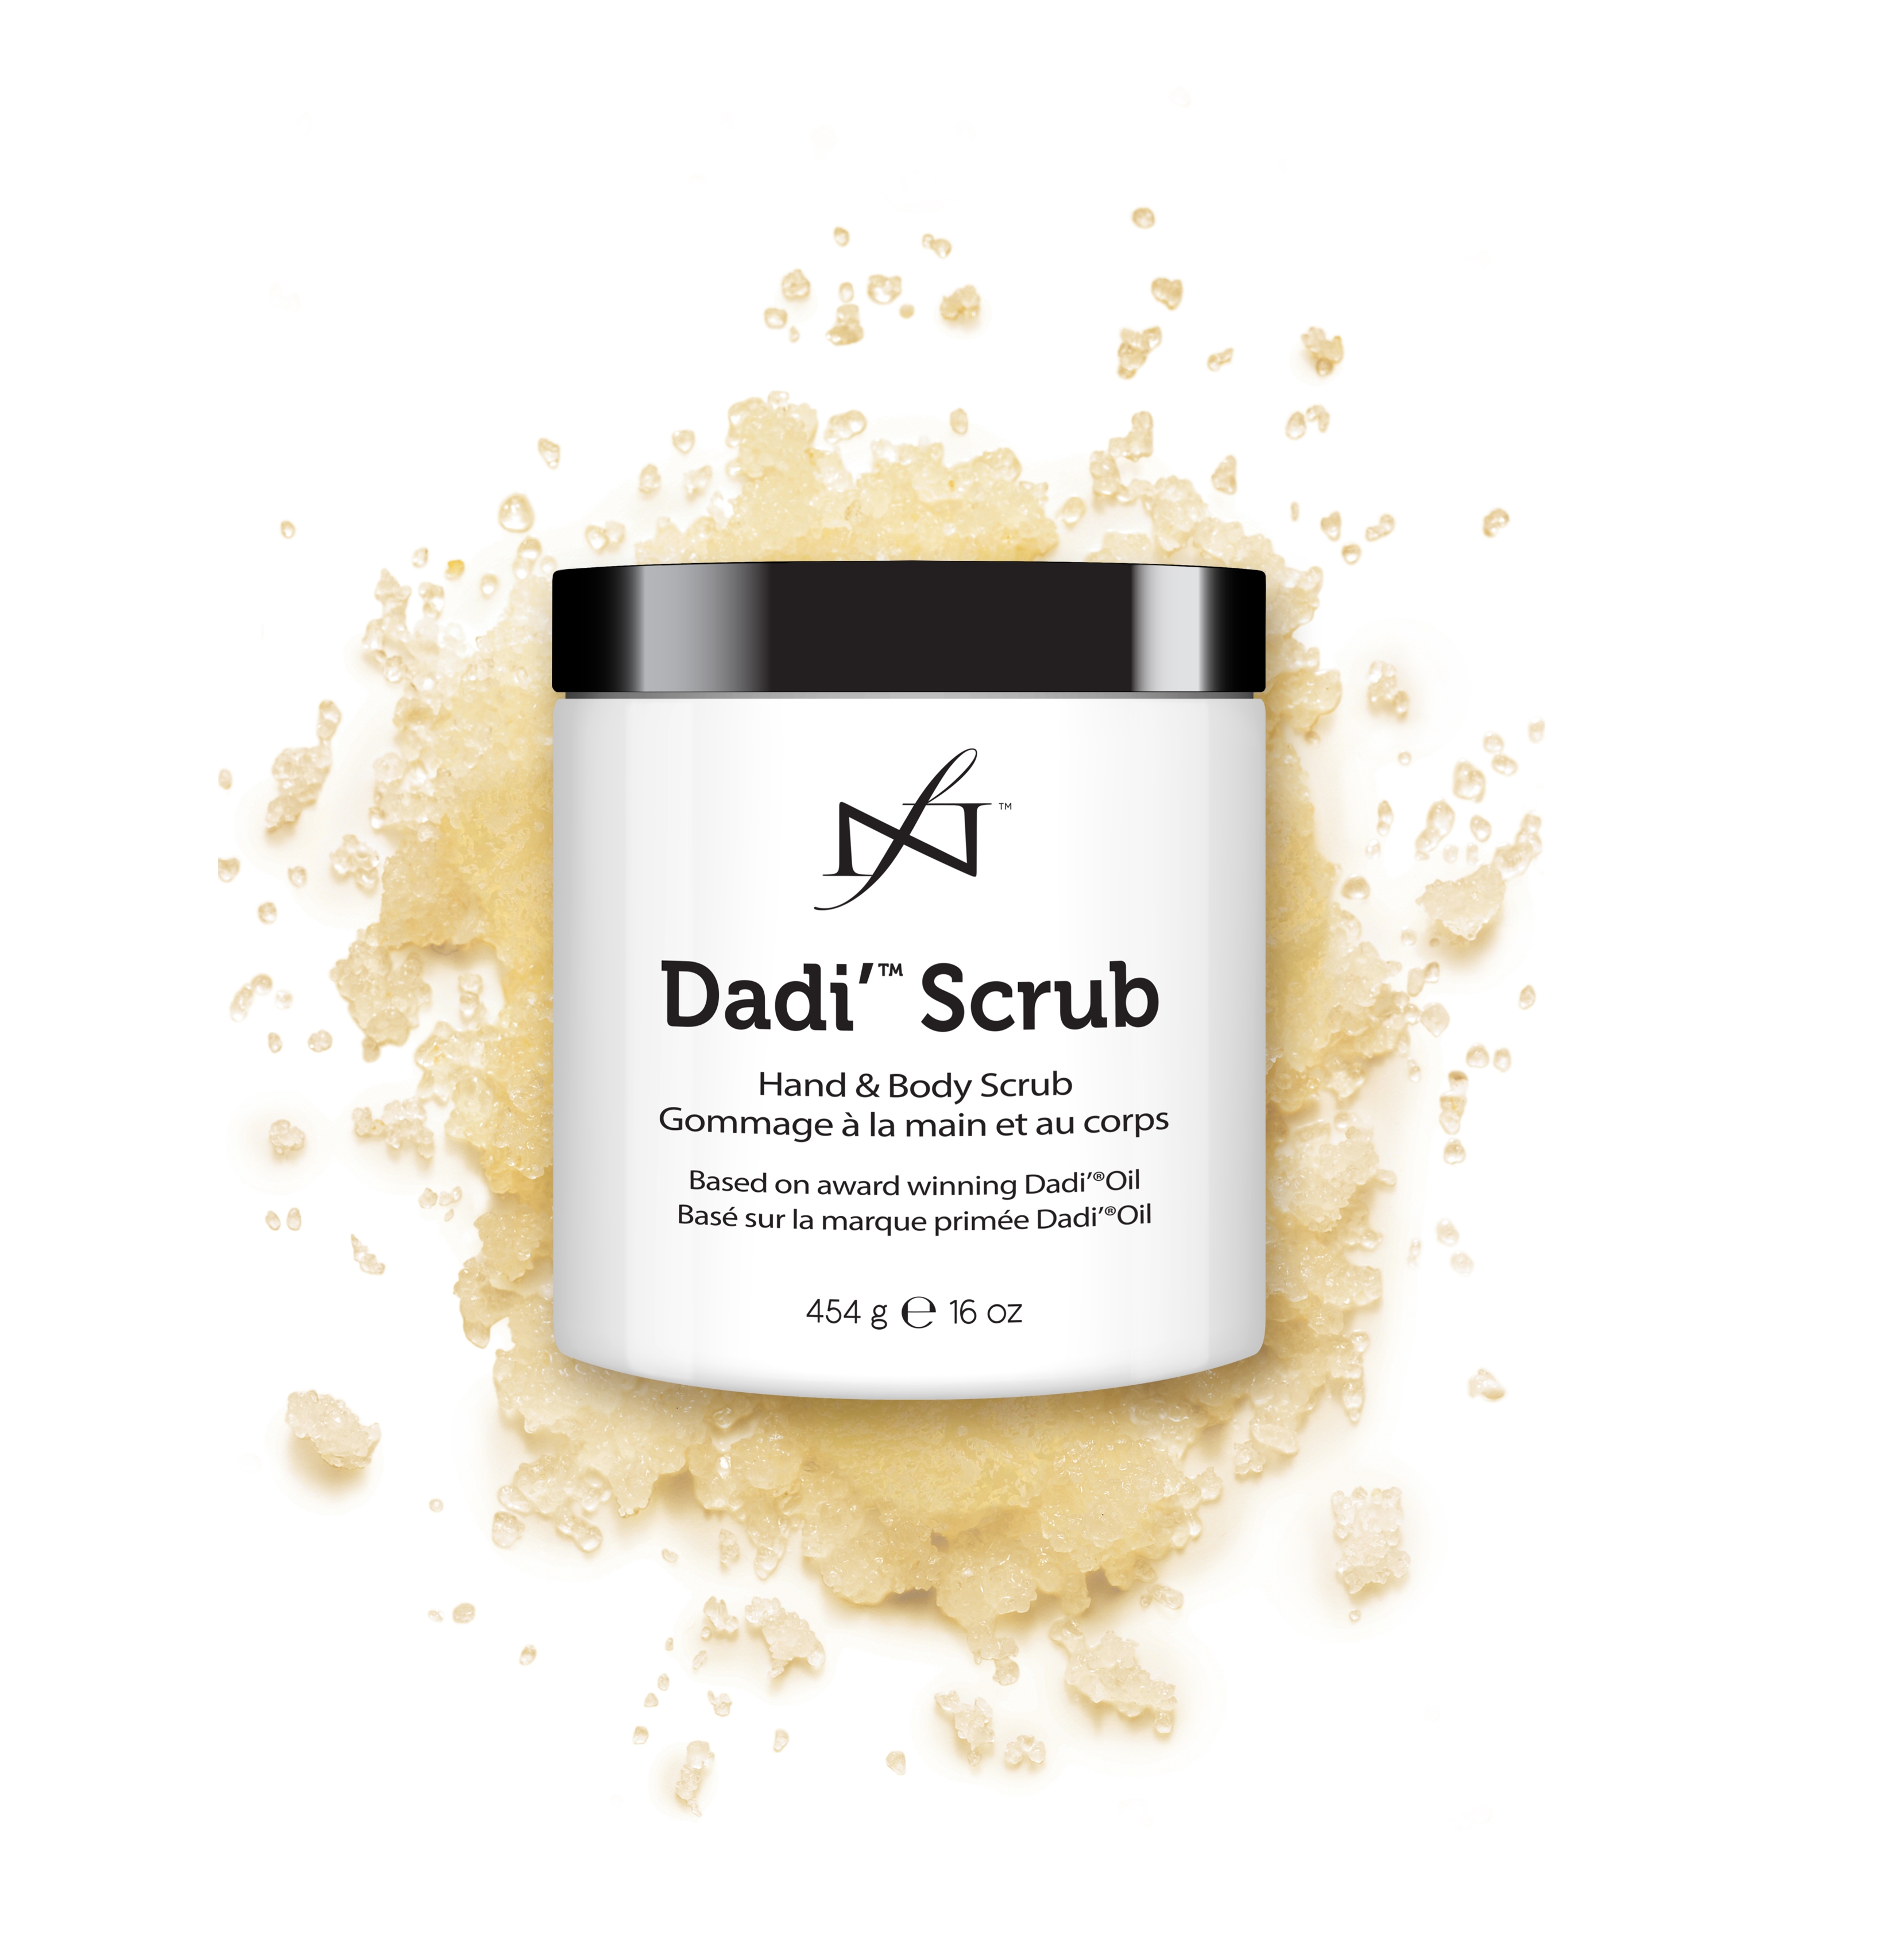 Introducing Dadi’Scrub By Famous Names